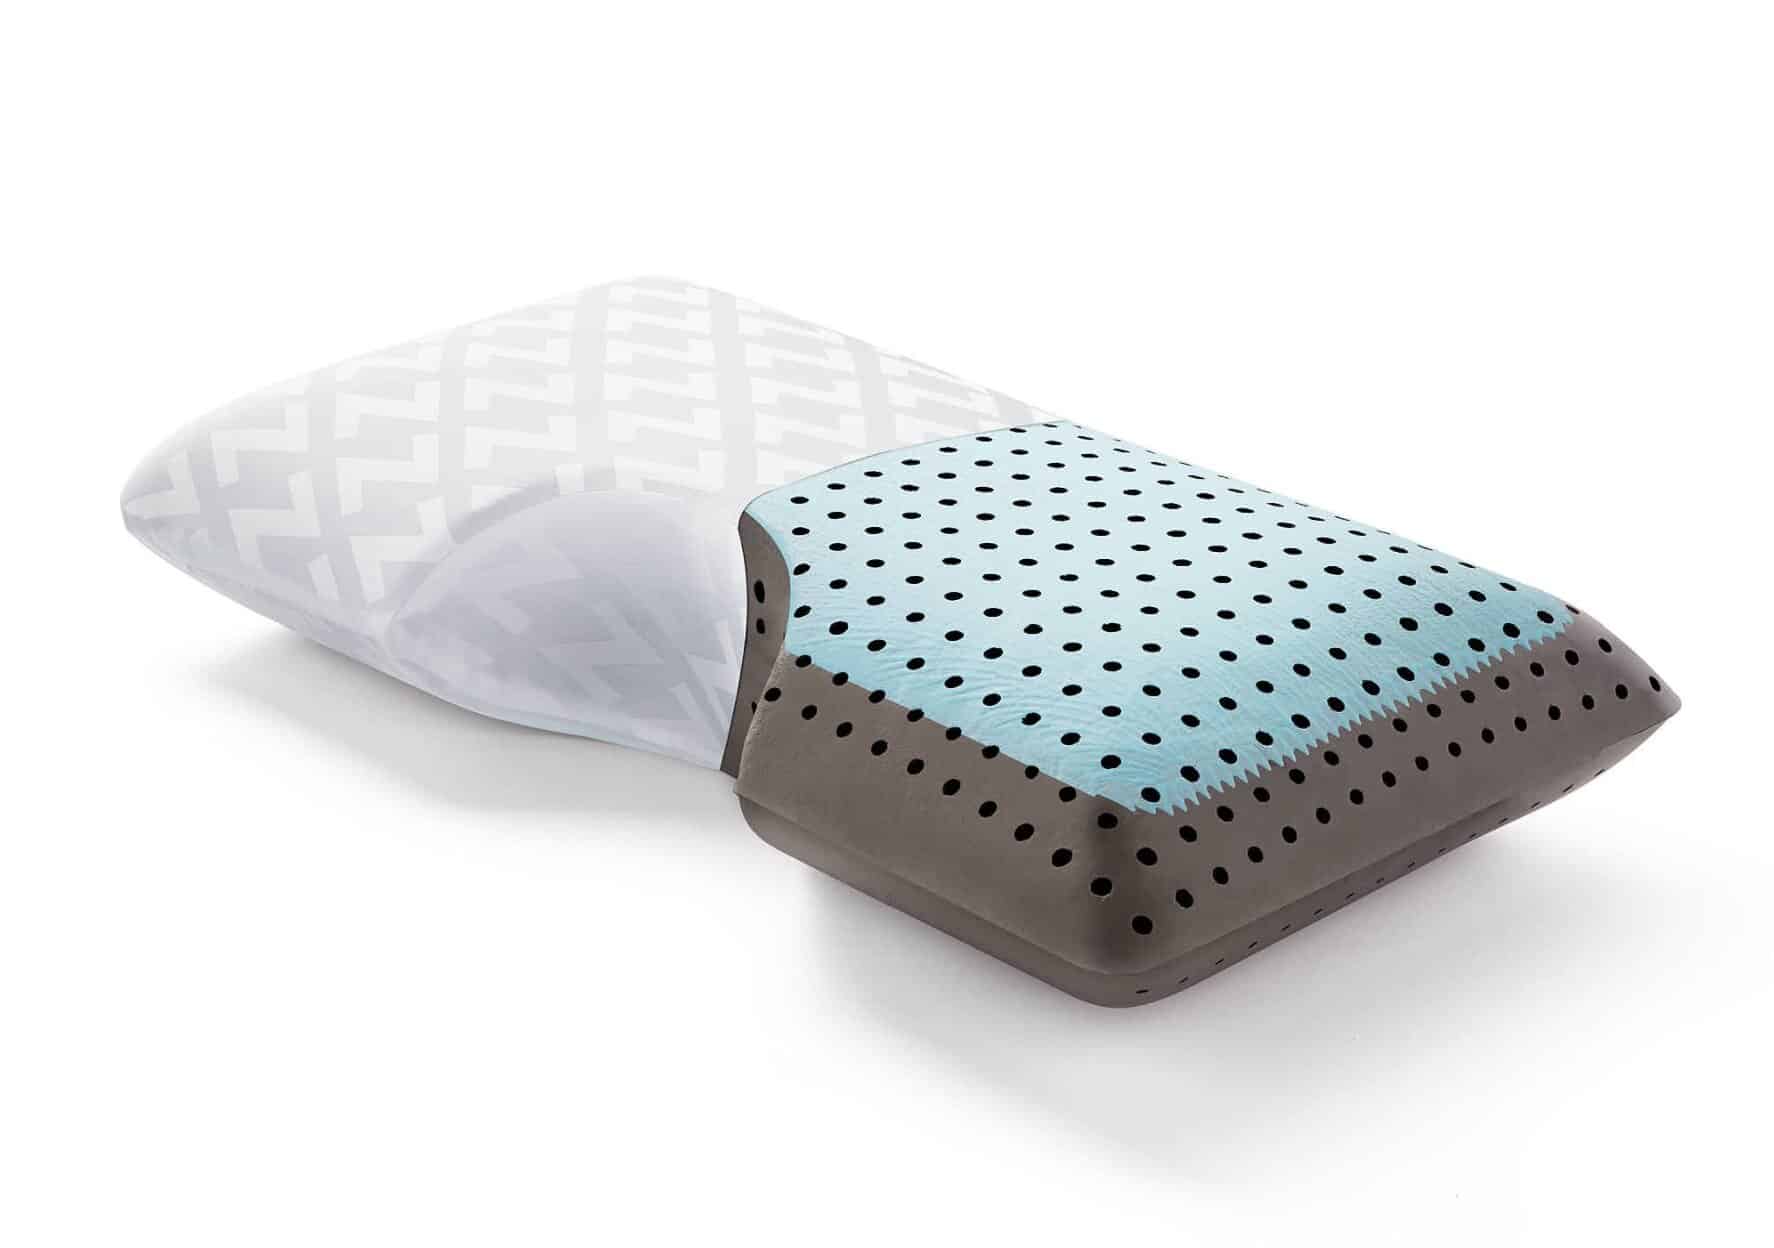 The Carboncool + Omniphase LT Shoulder Cutout Pillow from Malouf Sleep features carbon-infused foam and their temperature regulating OmniPhase material.